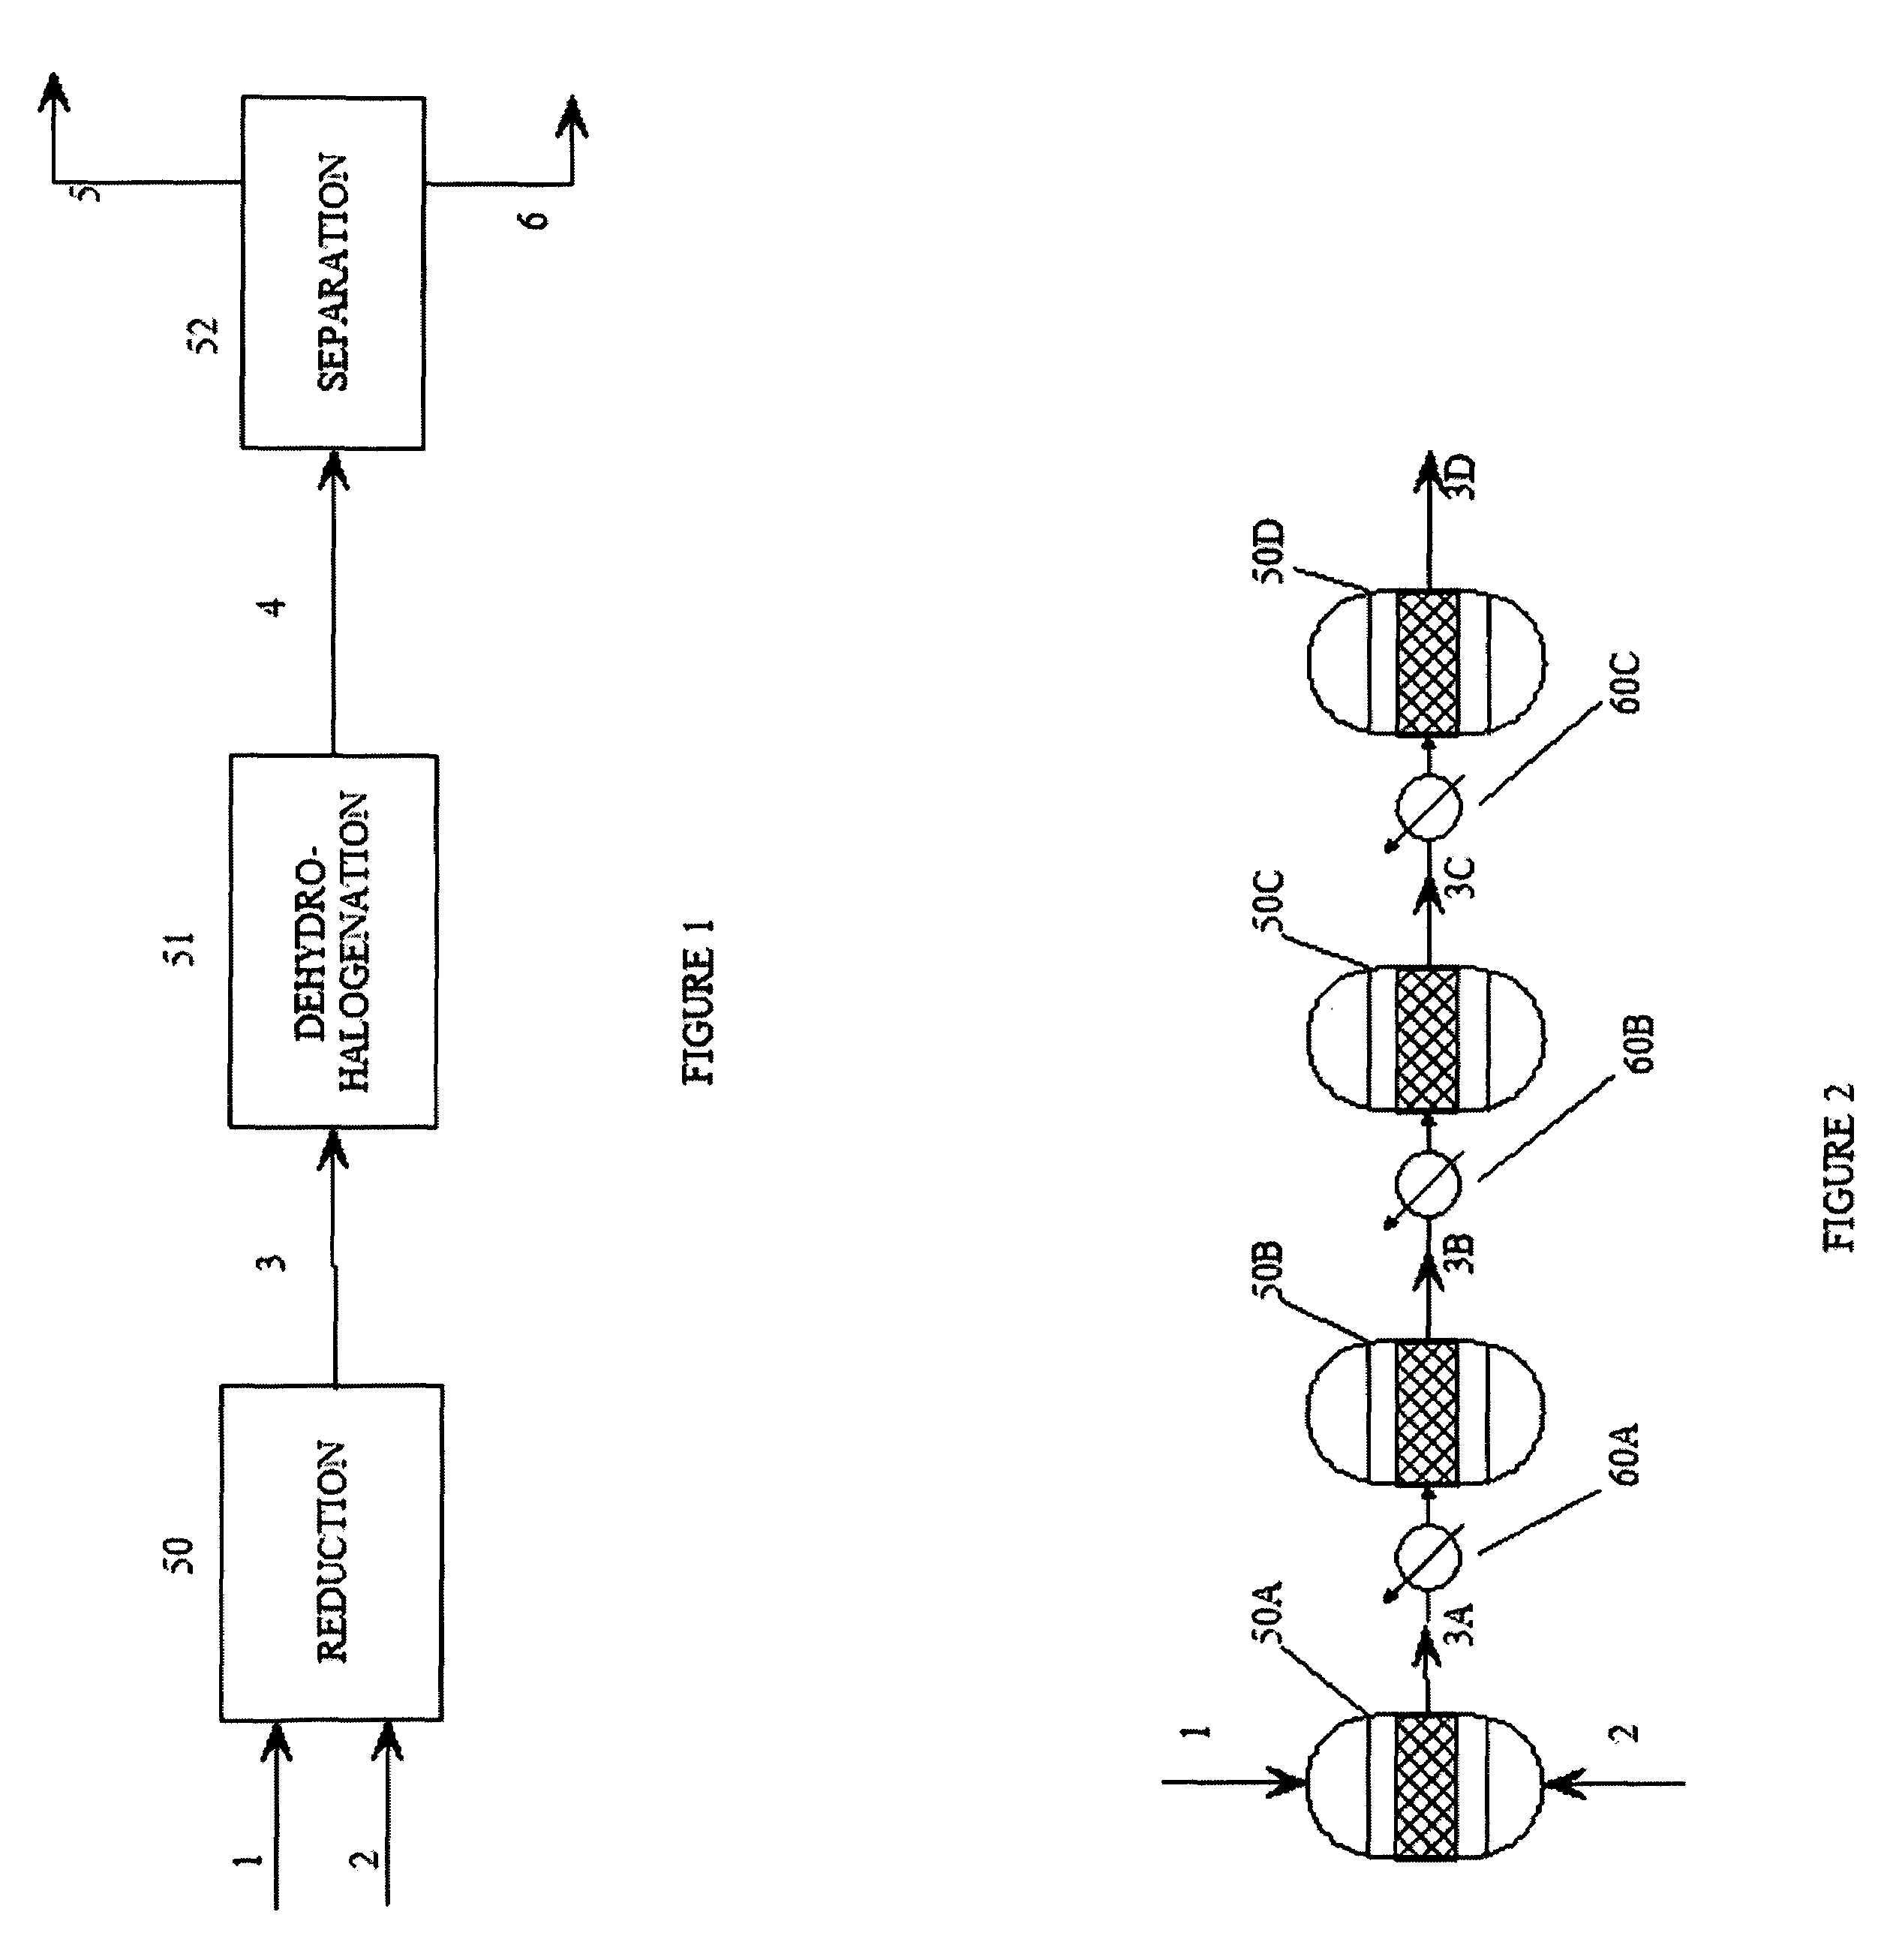 Process for manufacture of fluorinated olefins